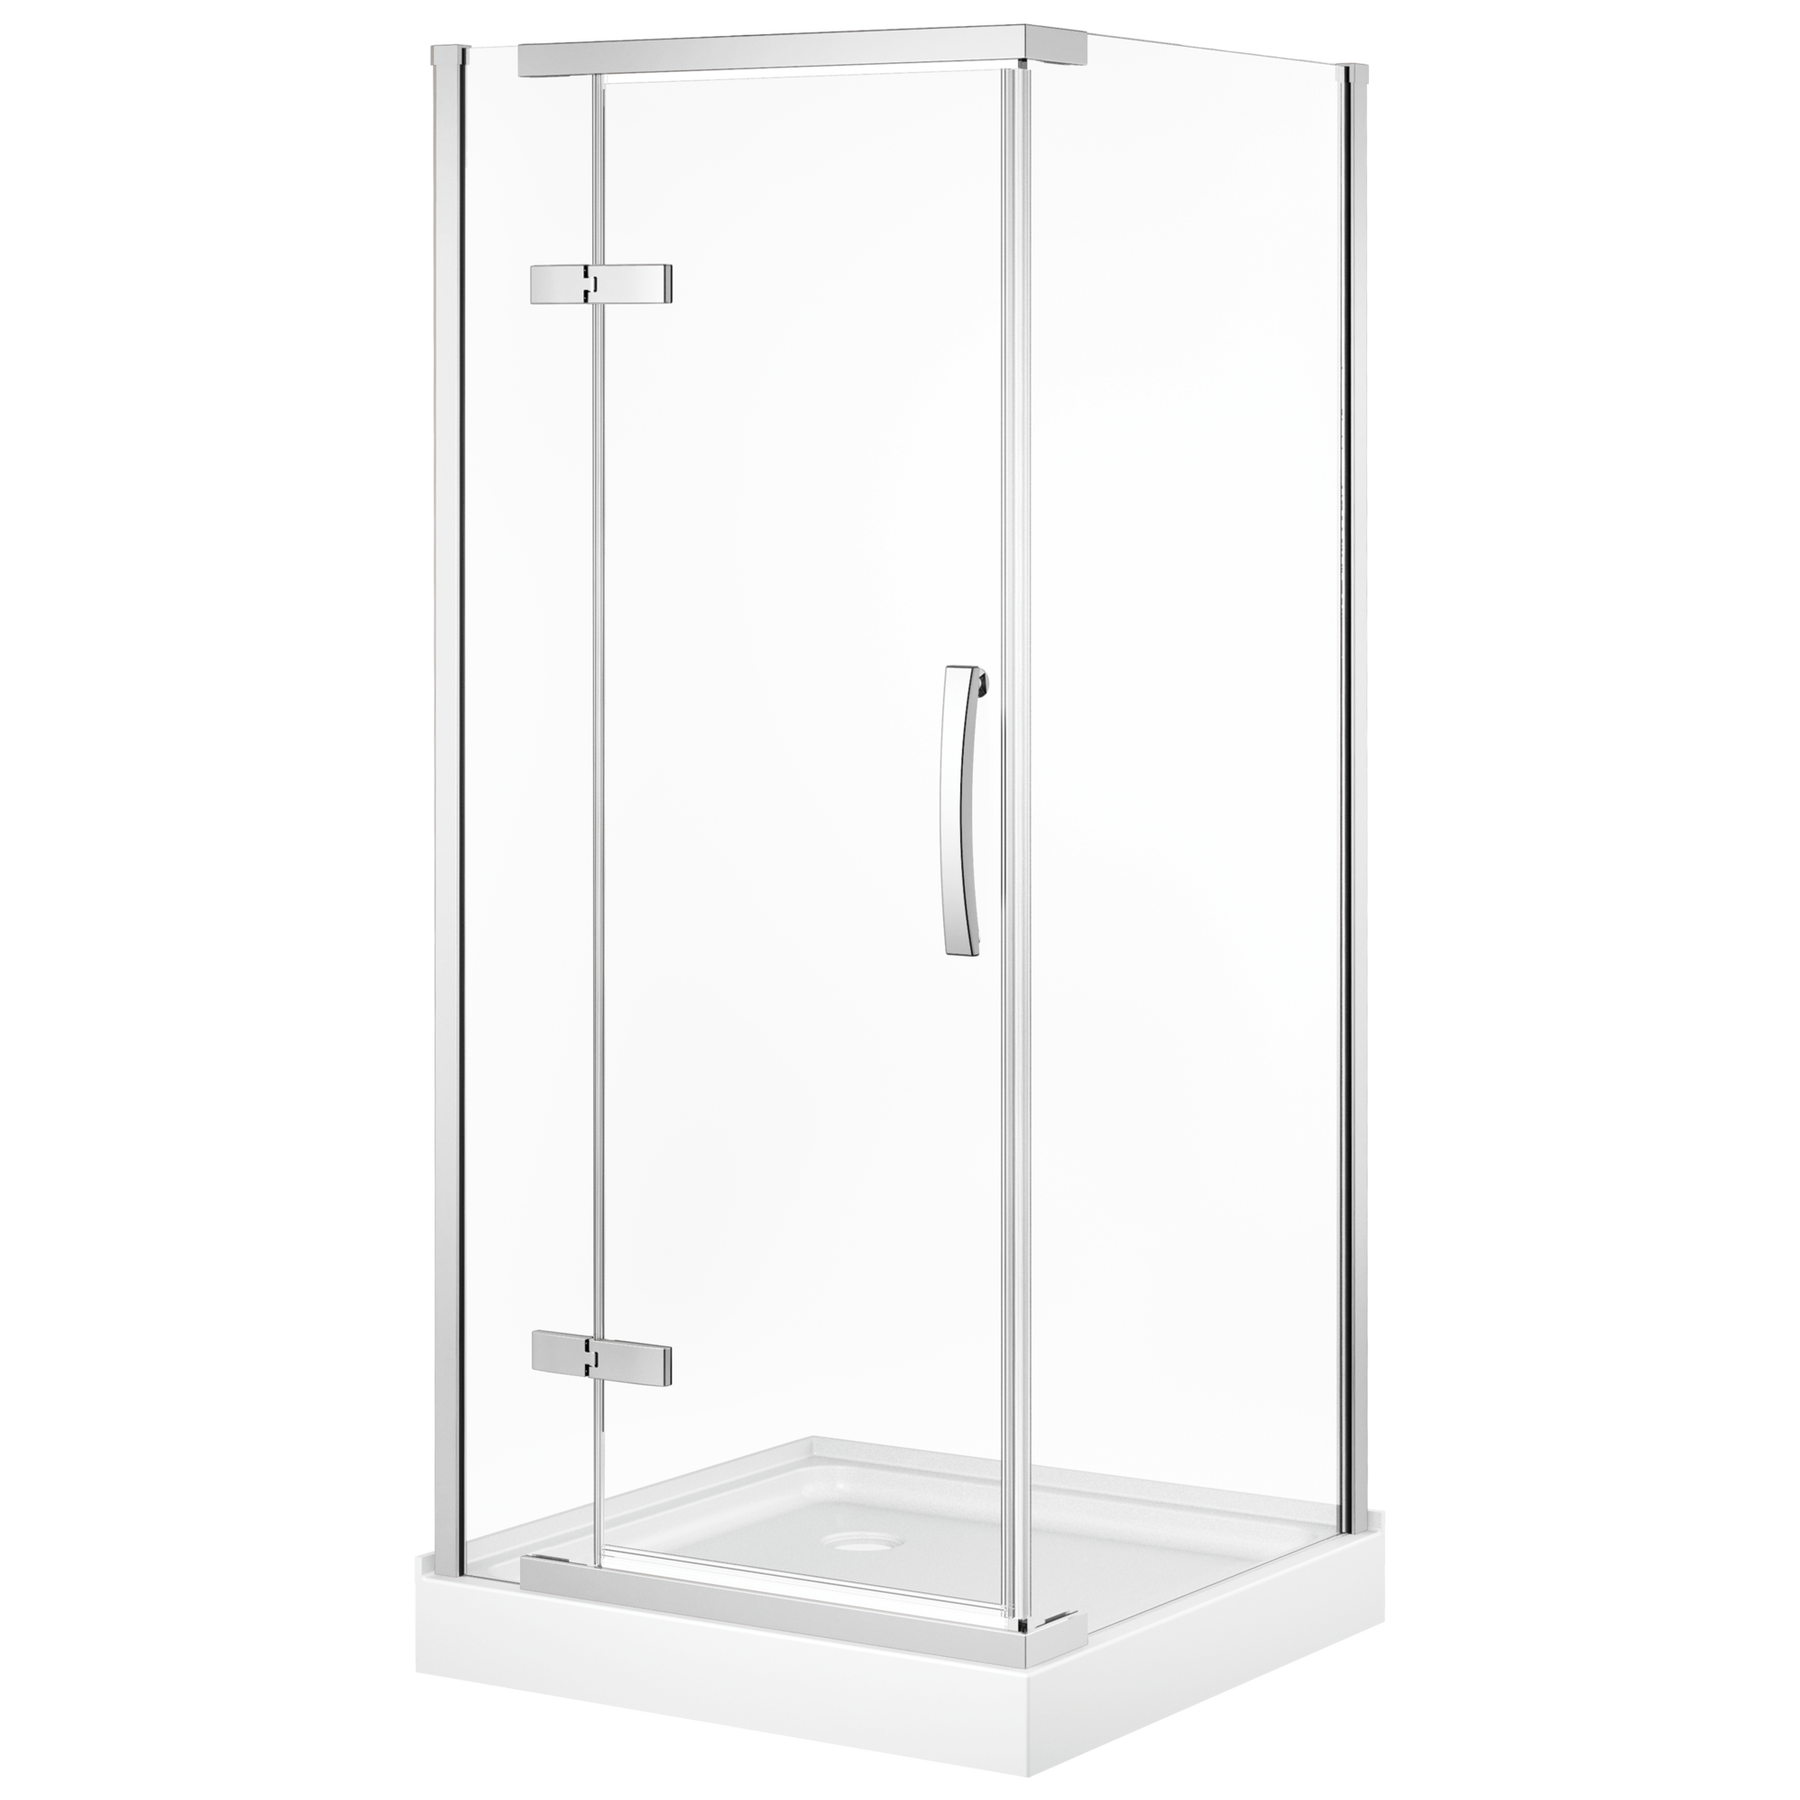 1000x1000mm Shower Enclosure Base White Stone Shower Tray – Aica Bathrooms